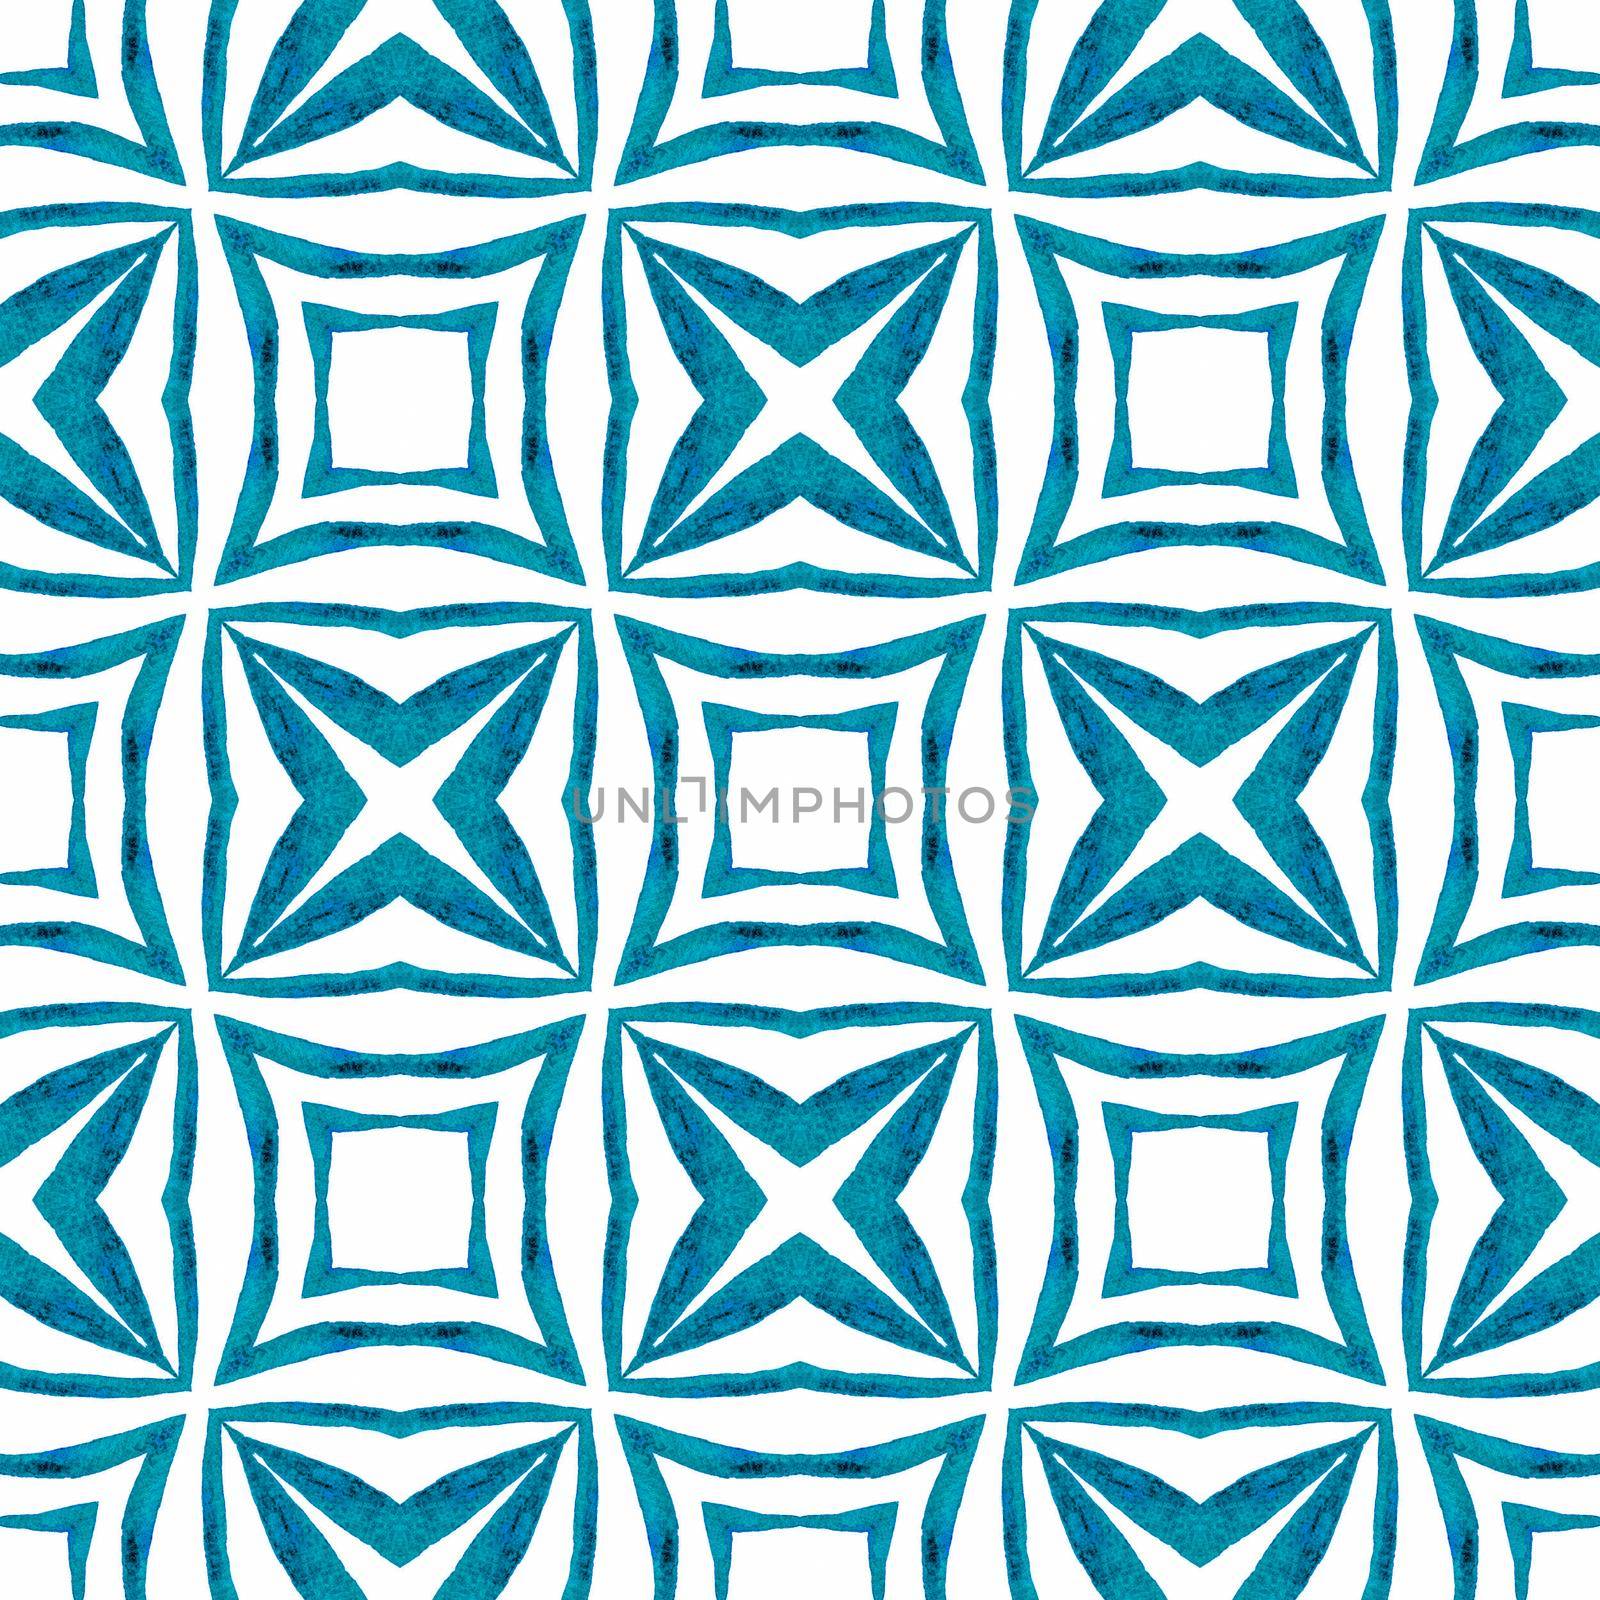 Ethnic hand painted pattern. Blue attractive boho chic summer design. Watercolor summer ethnic border pattern. Textile ready ideal print, swimwear fabric, wallpaper, wrapping.